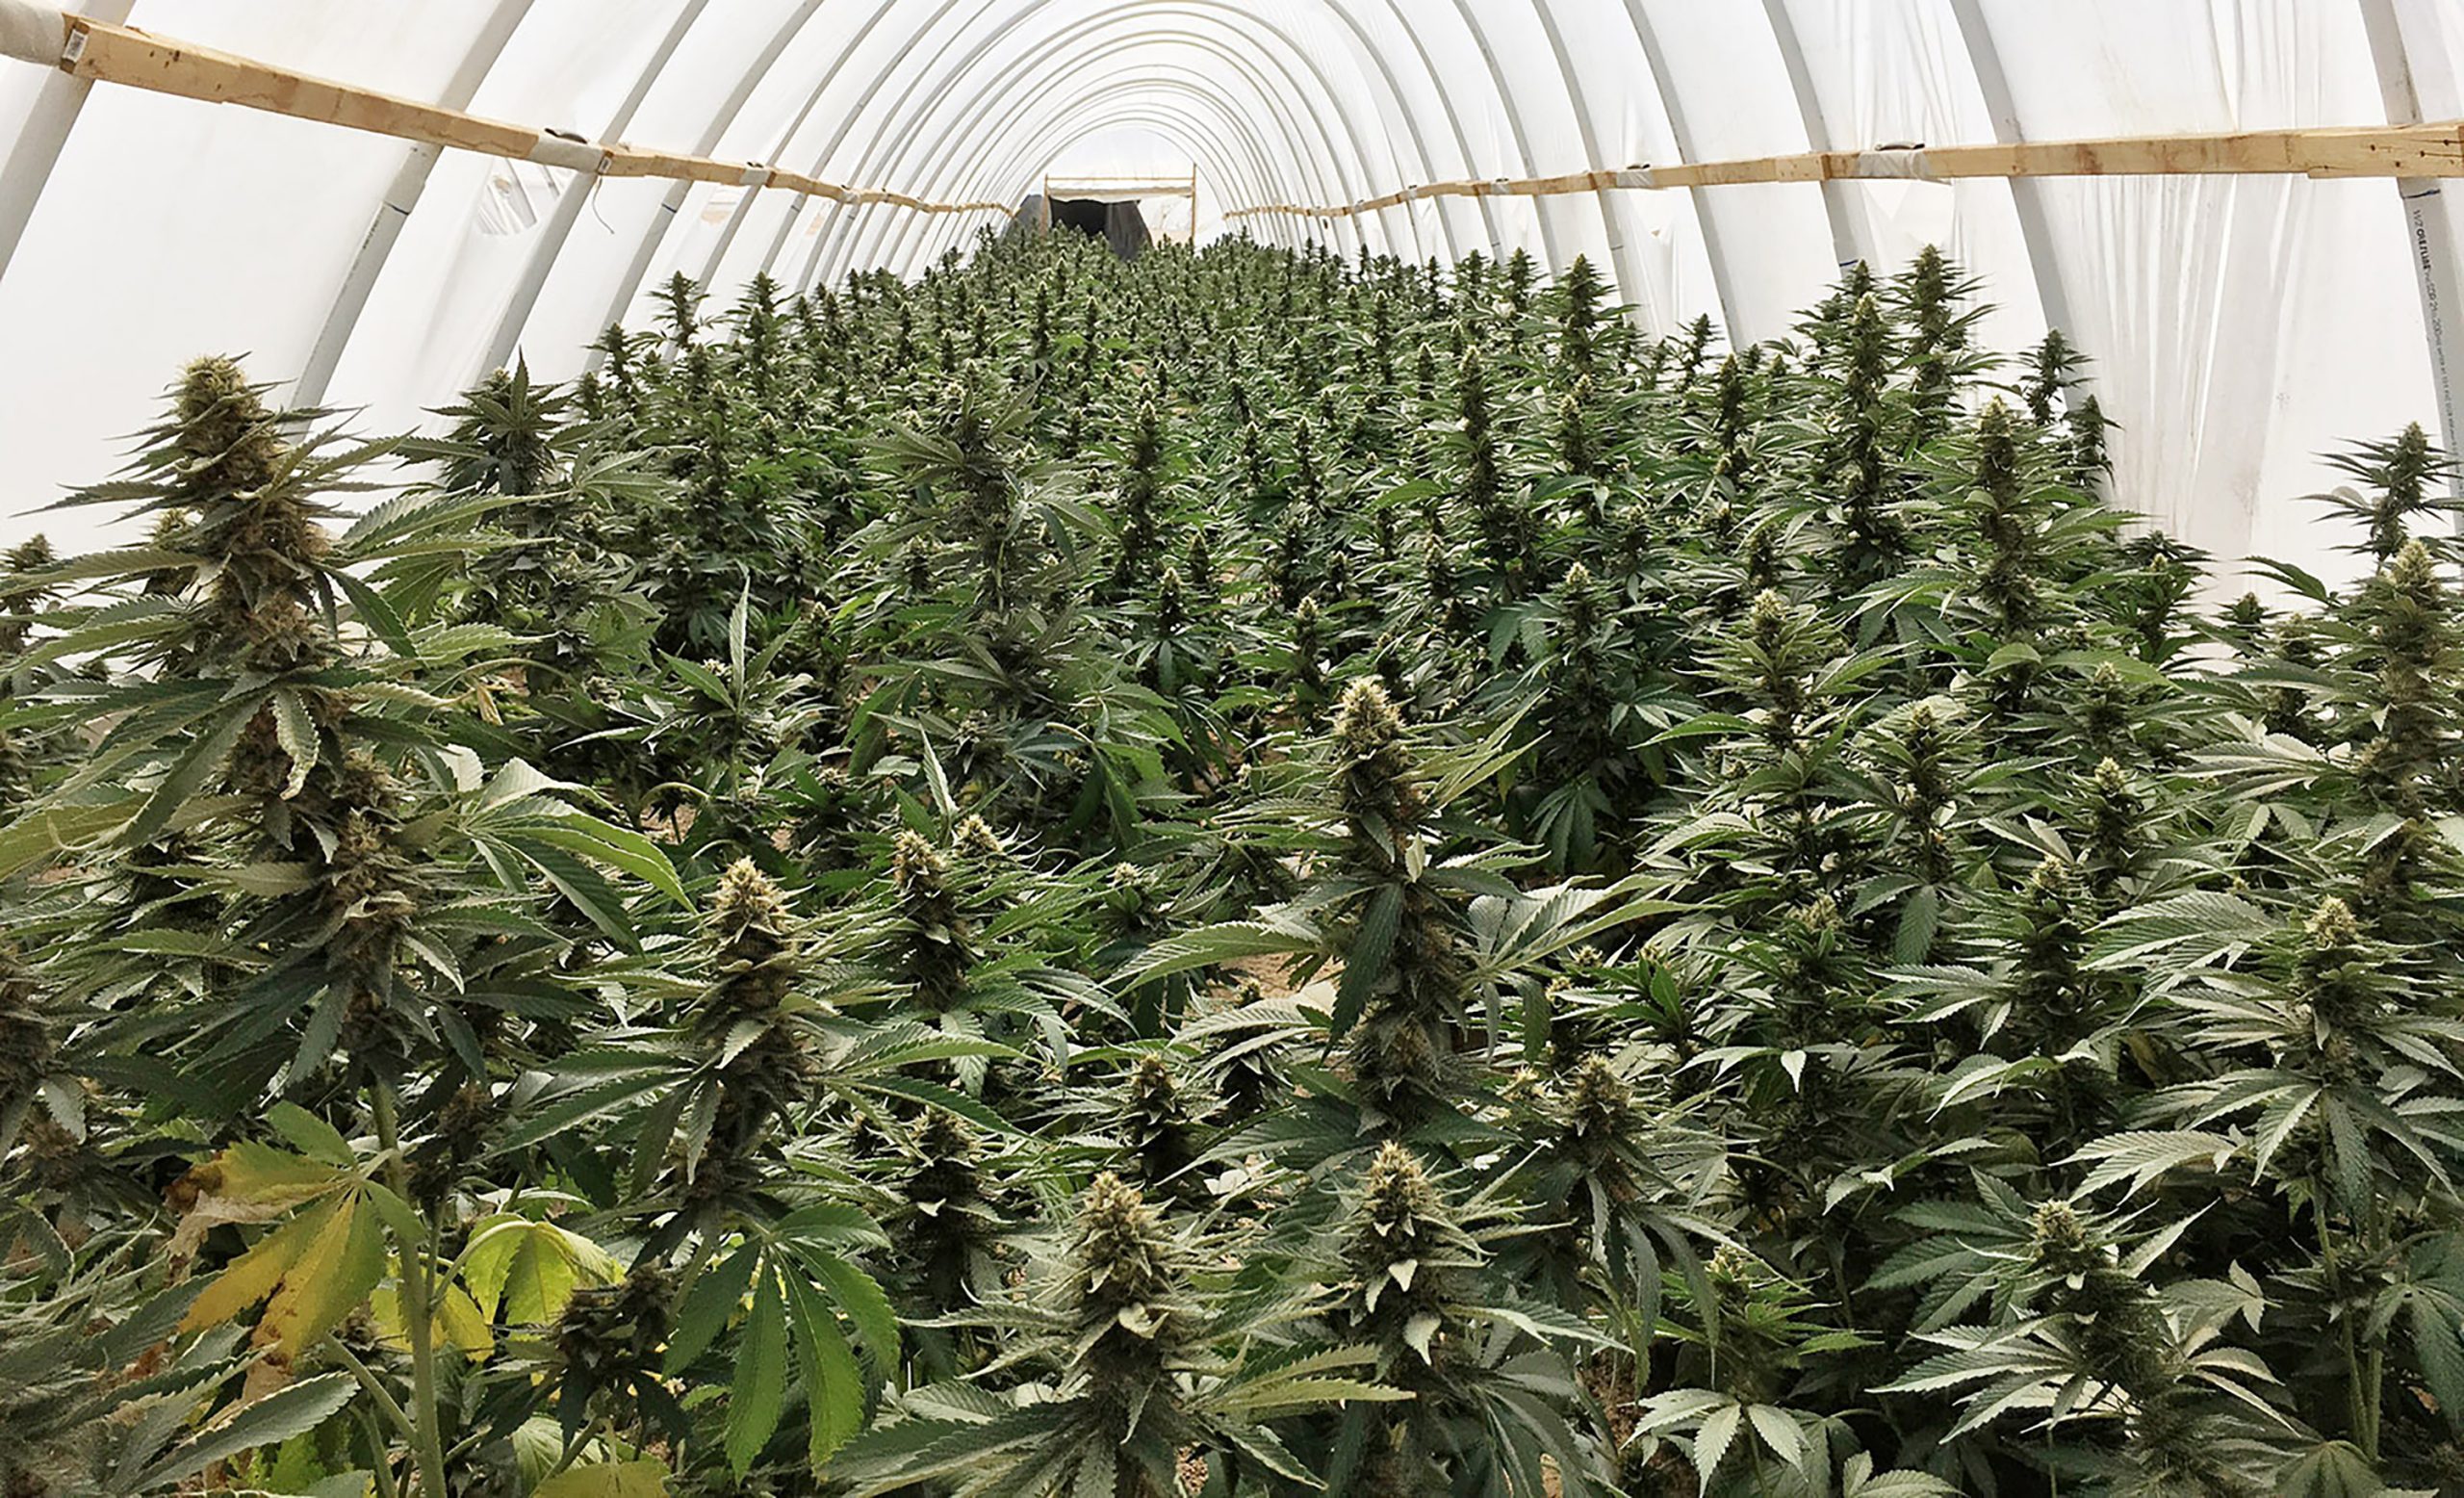 A June 8 photo from the Los Angeles County Sheriff’s Department, shows marijuana plants inside an illegal grow operation in the Antelope Valley. (L.A. County Sheriff’s Department/TNS)